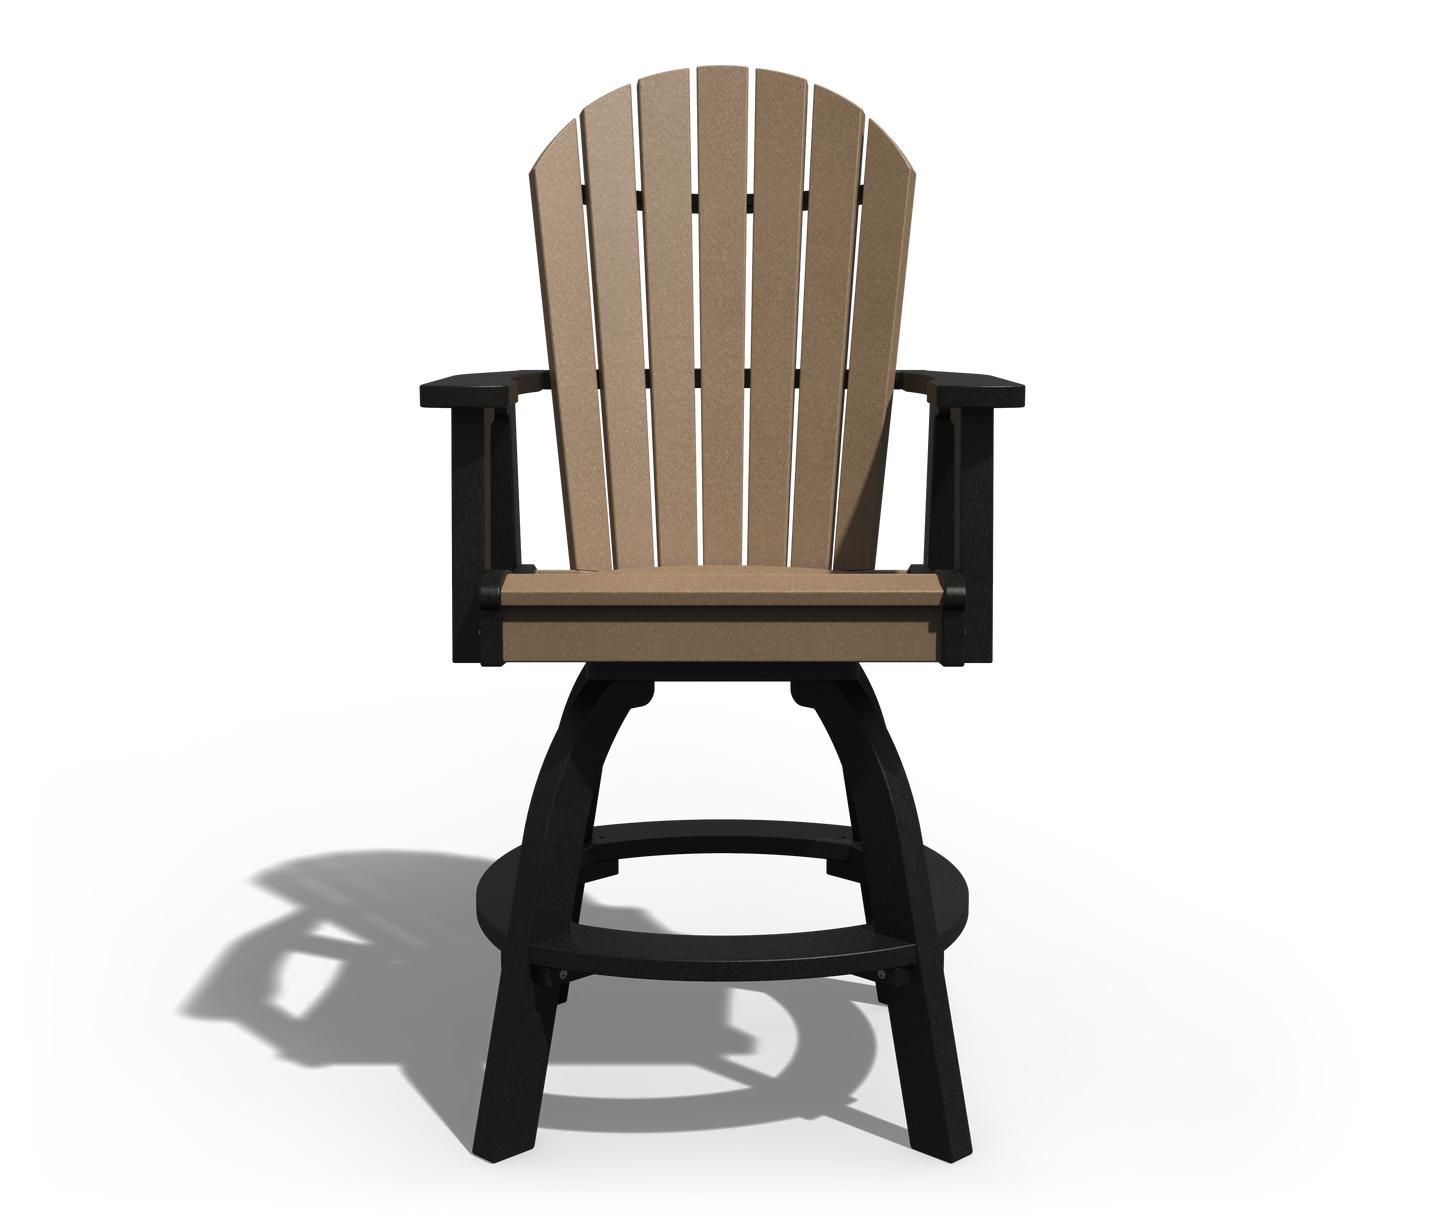 Patiova Recycled Plastic Adirondack Swivel Chair (Dining Height) - LEAD TIME TO SHIP 4 WEEKS